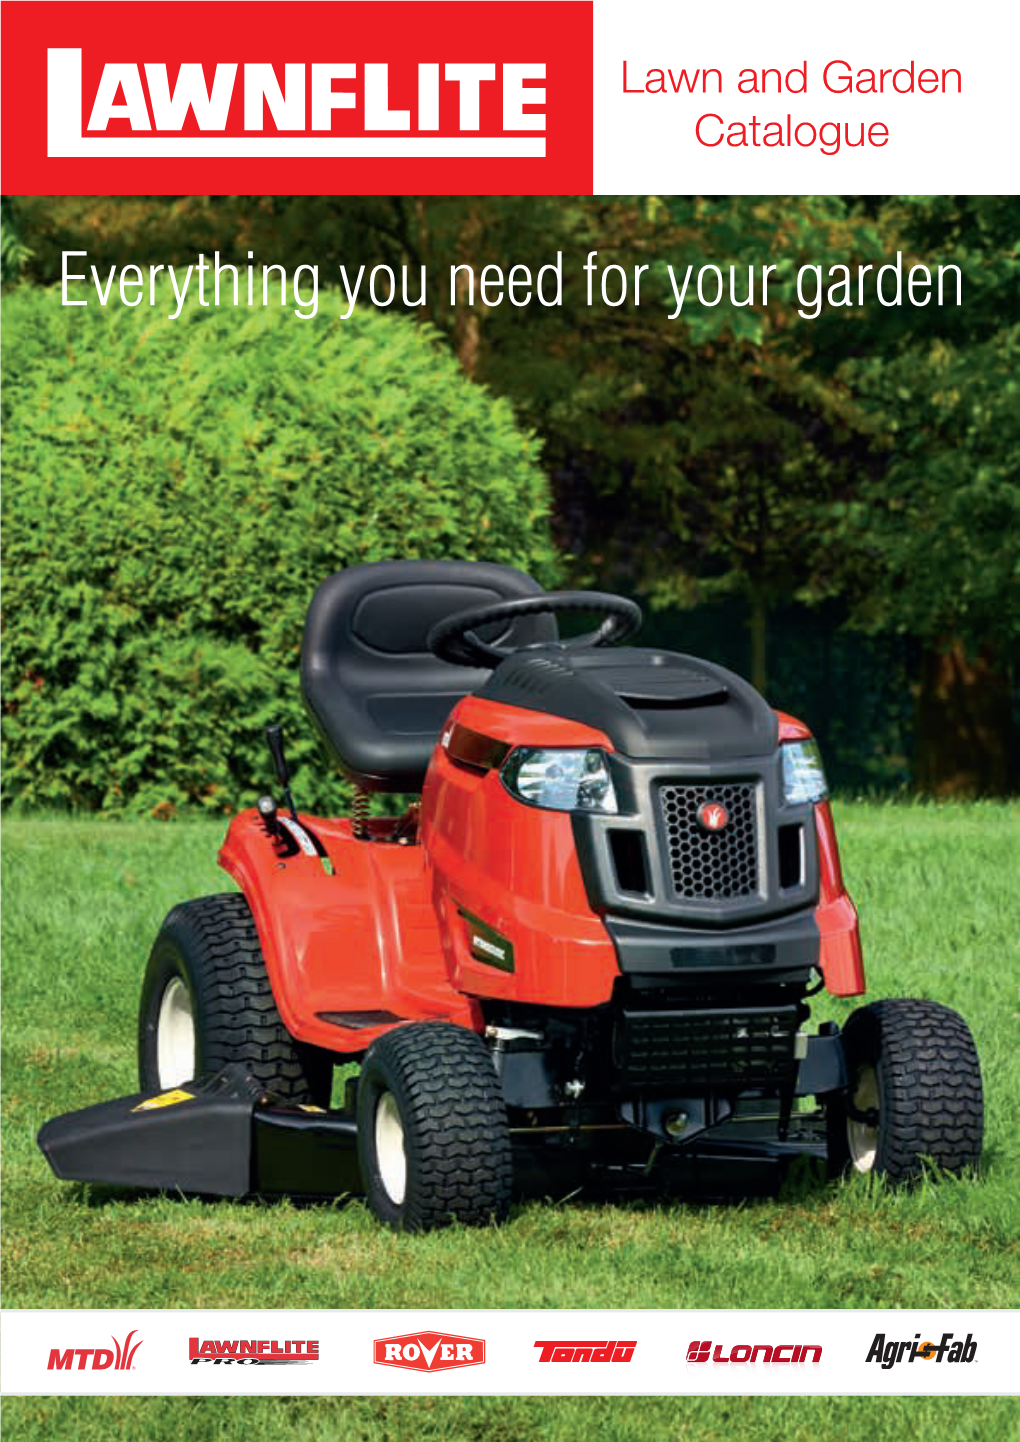 View the Lawnflite Brochure for More Information